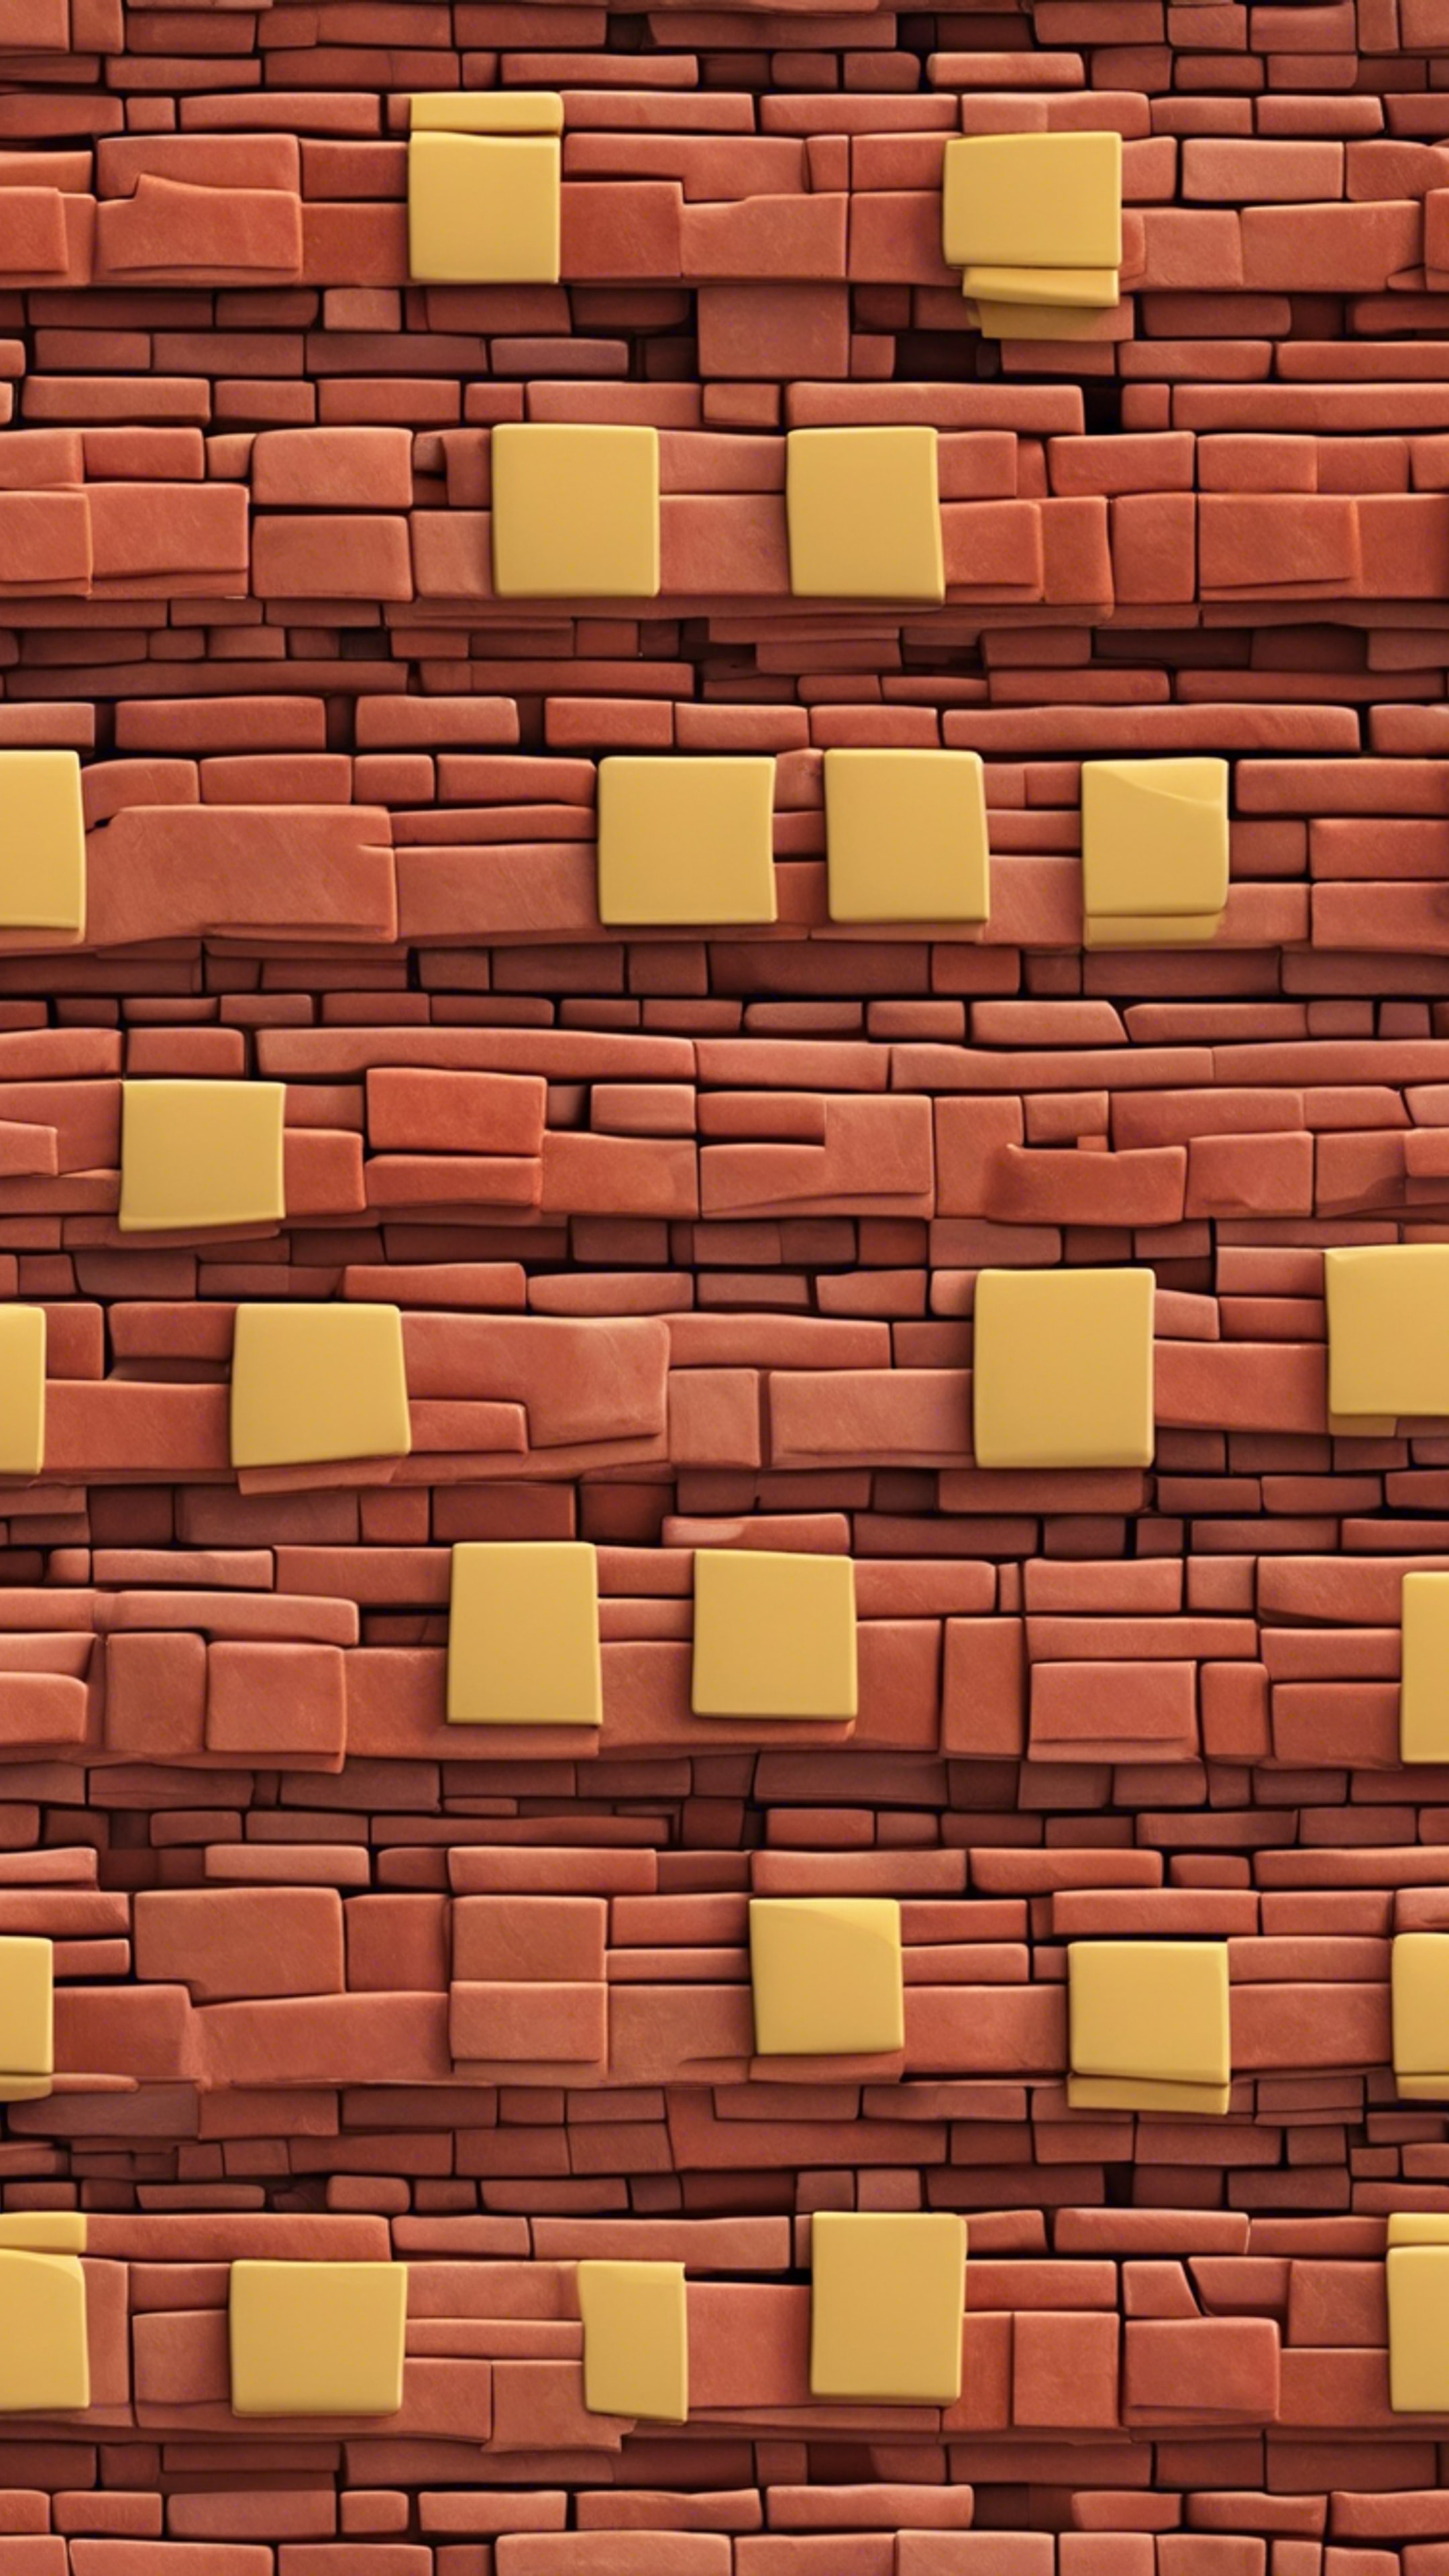 A seamless pattern of red and yellow bricks arranged in an interlocking zigzag. Валлпапер[44455a9799a64fc6ae31]